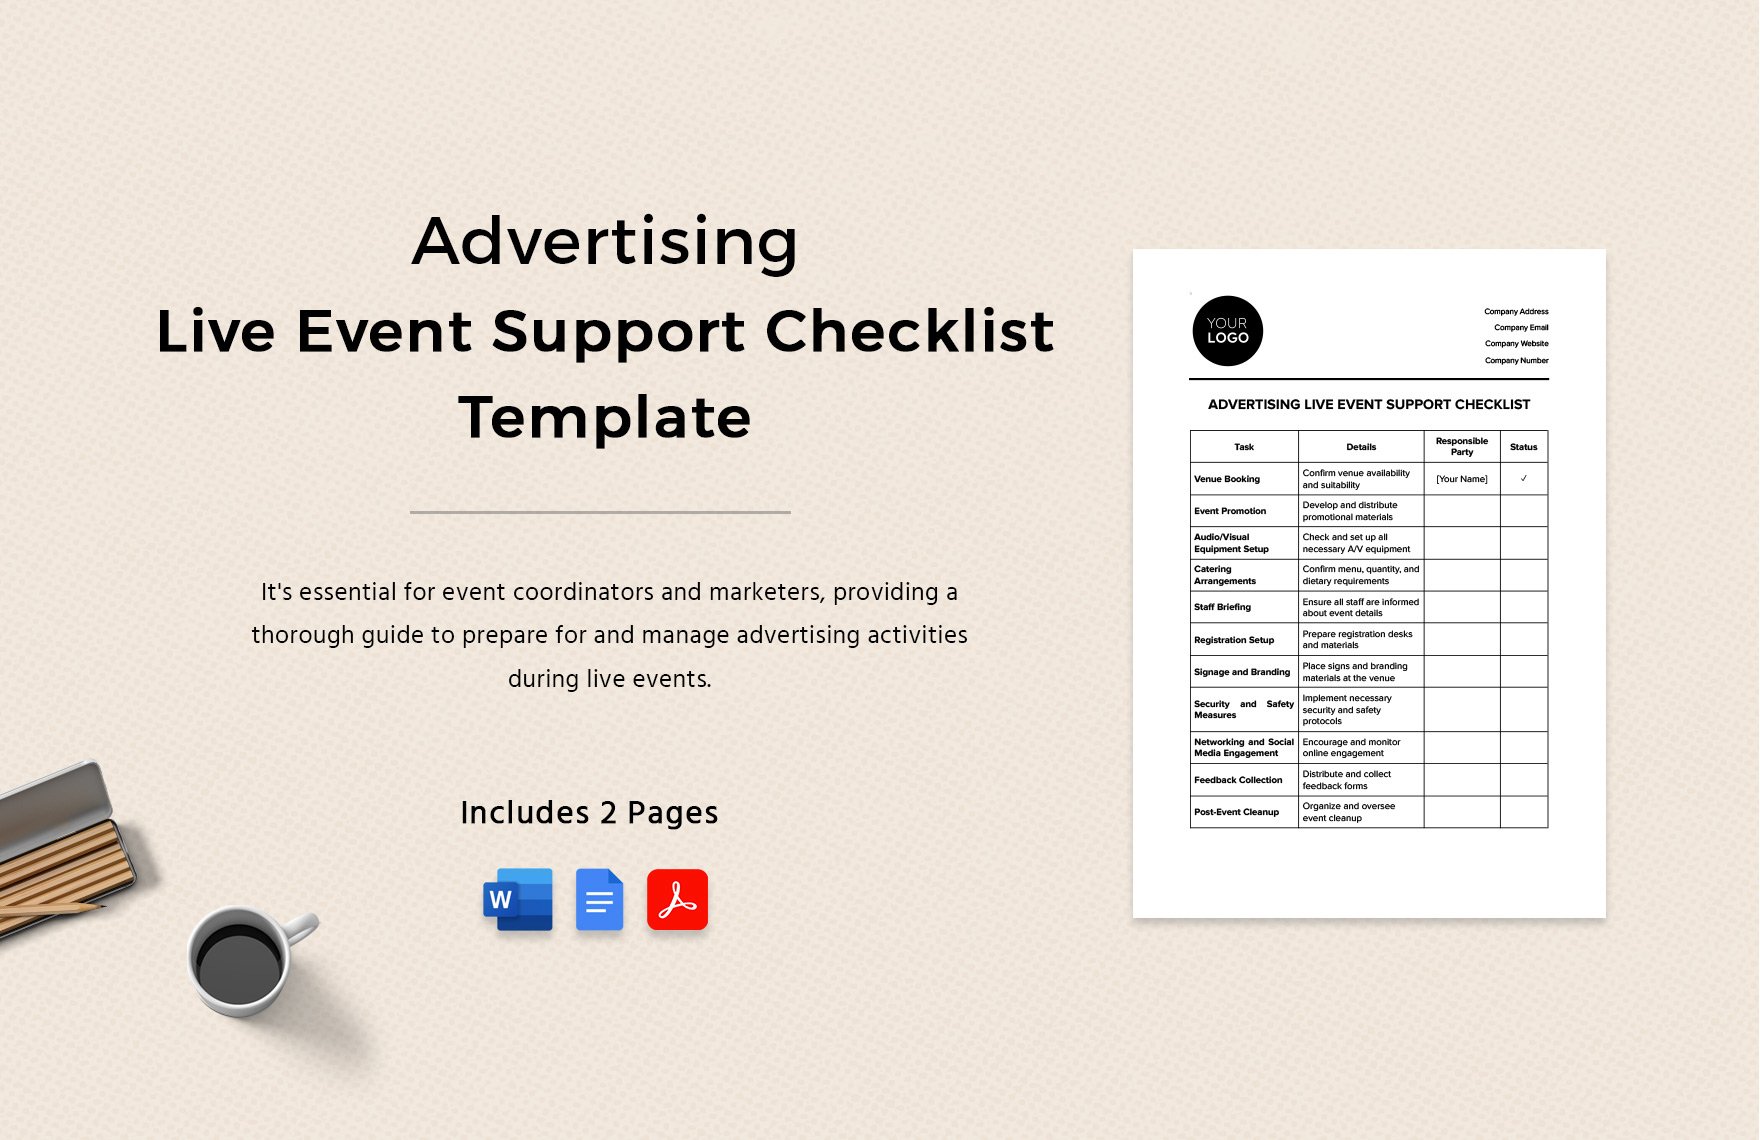 Advertising Live Event Support Checklist Template in Word, Google Docs, PDF